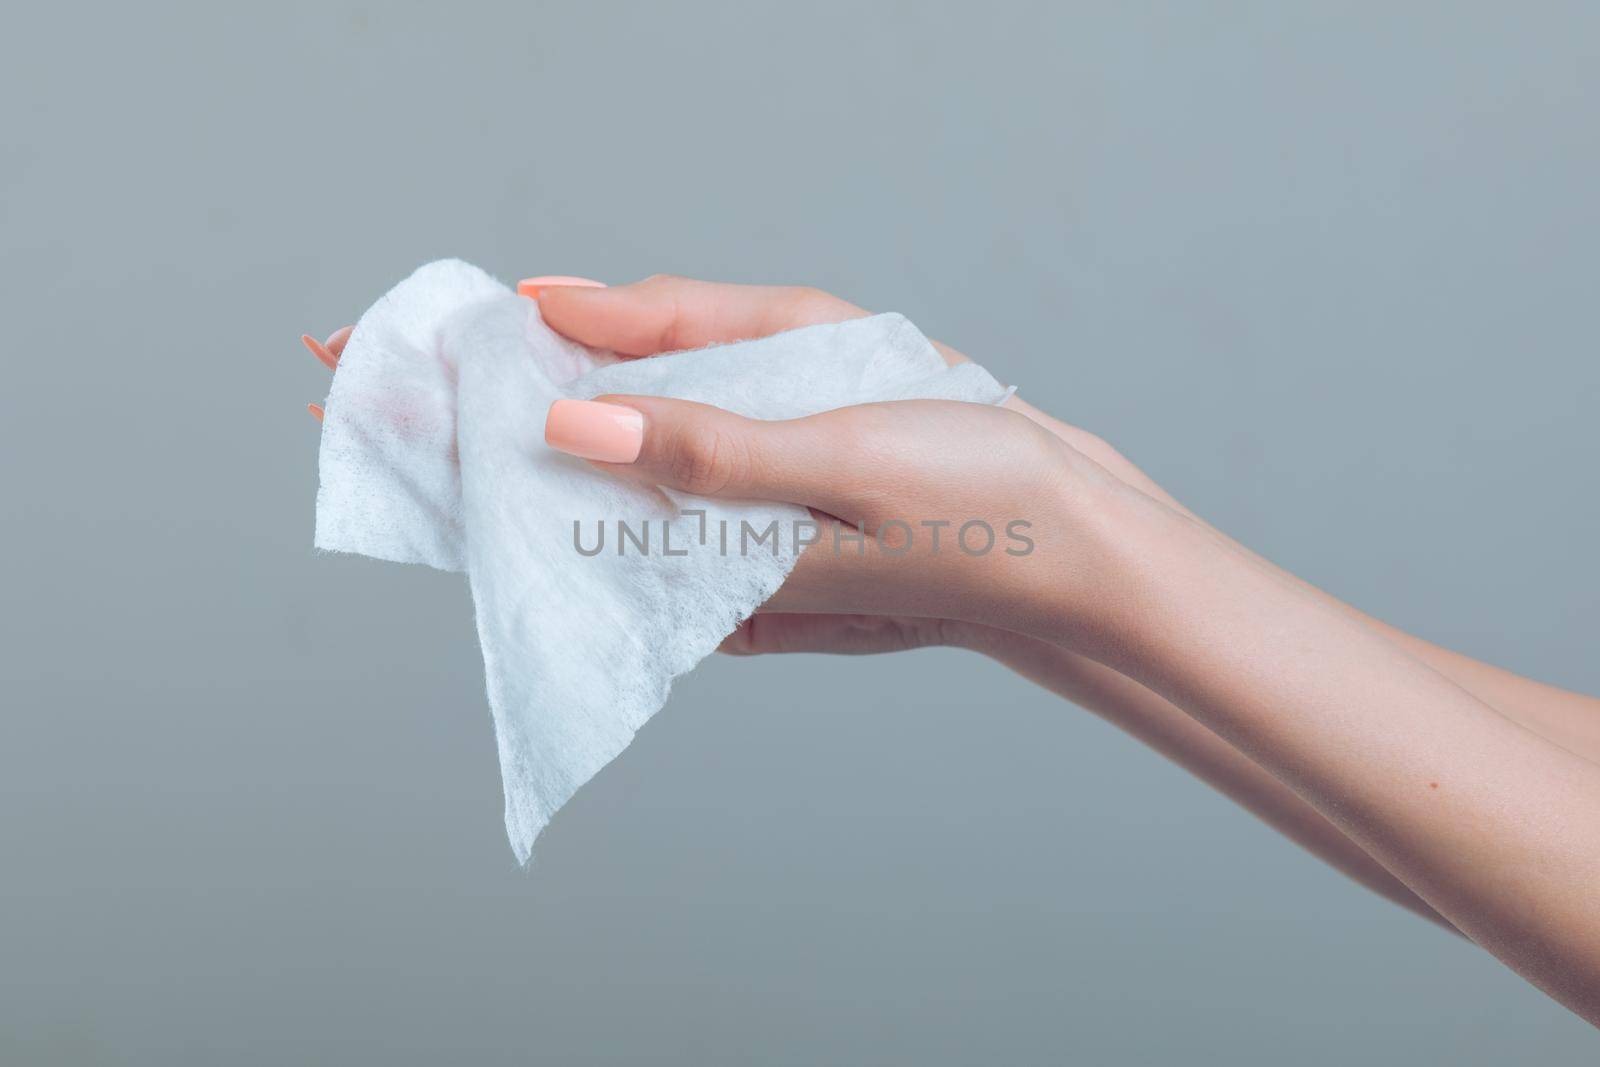 Prevention of infectious diseases - Cleaning hands with wet wipes by adamr